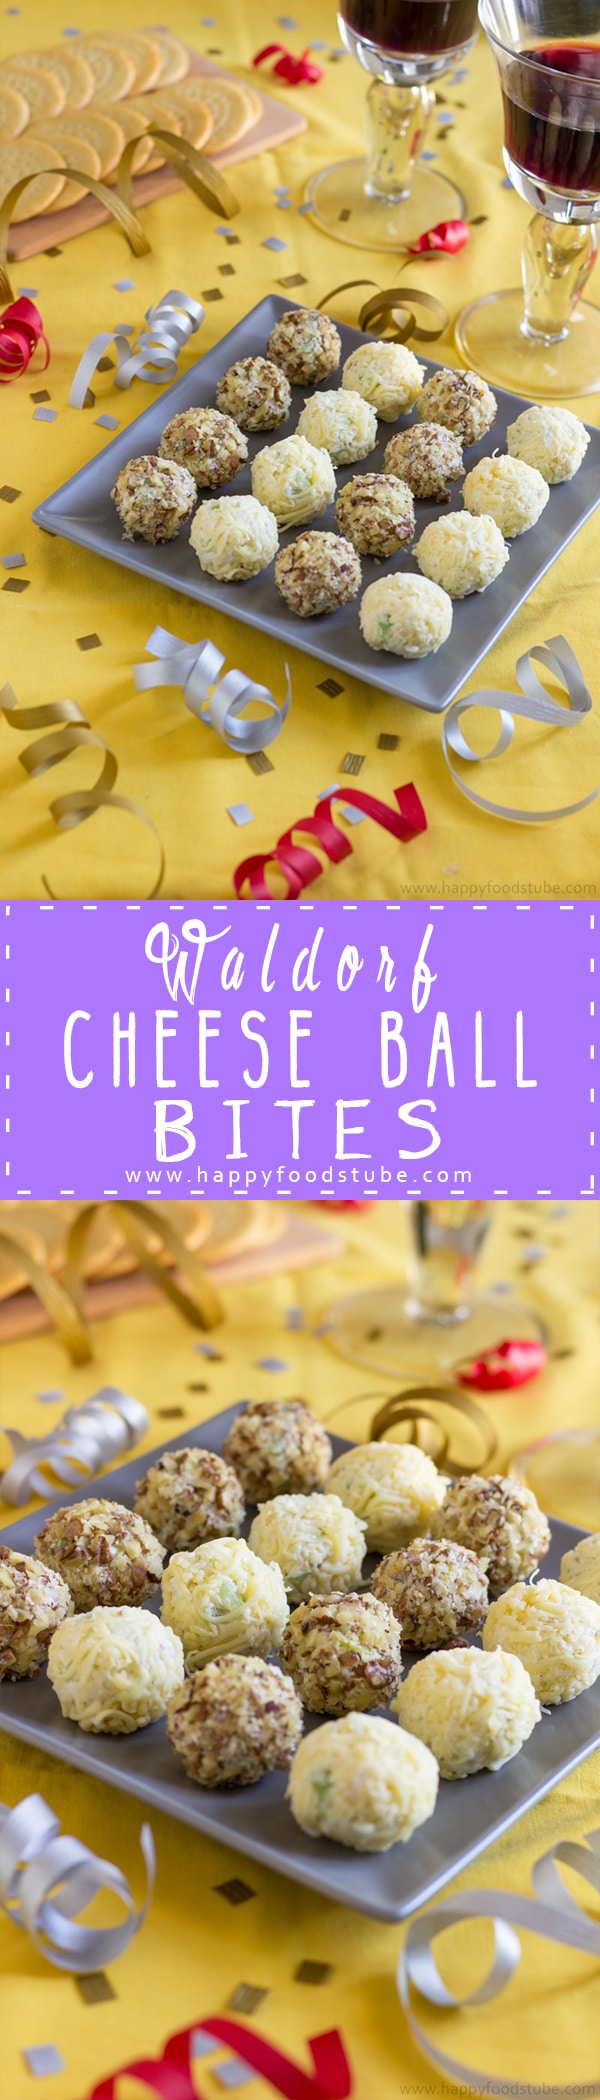 Impress your guests with these Waldorf cheese ball bites. A simple party snack idea that only takes 15 minutes to prepare and tastes like Waldorf salad! Only 5 ingredients | happyfoodstube.com